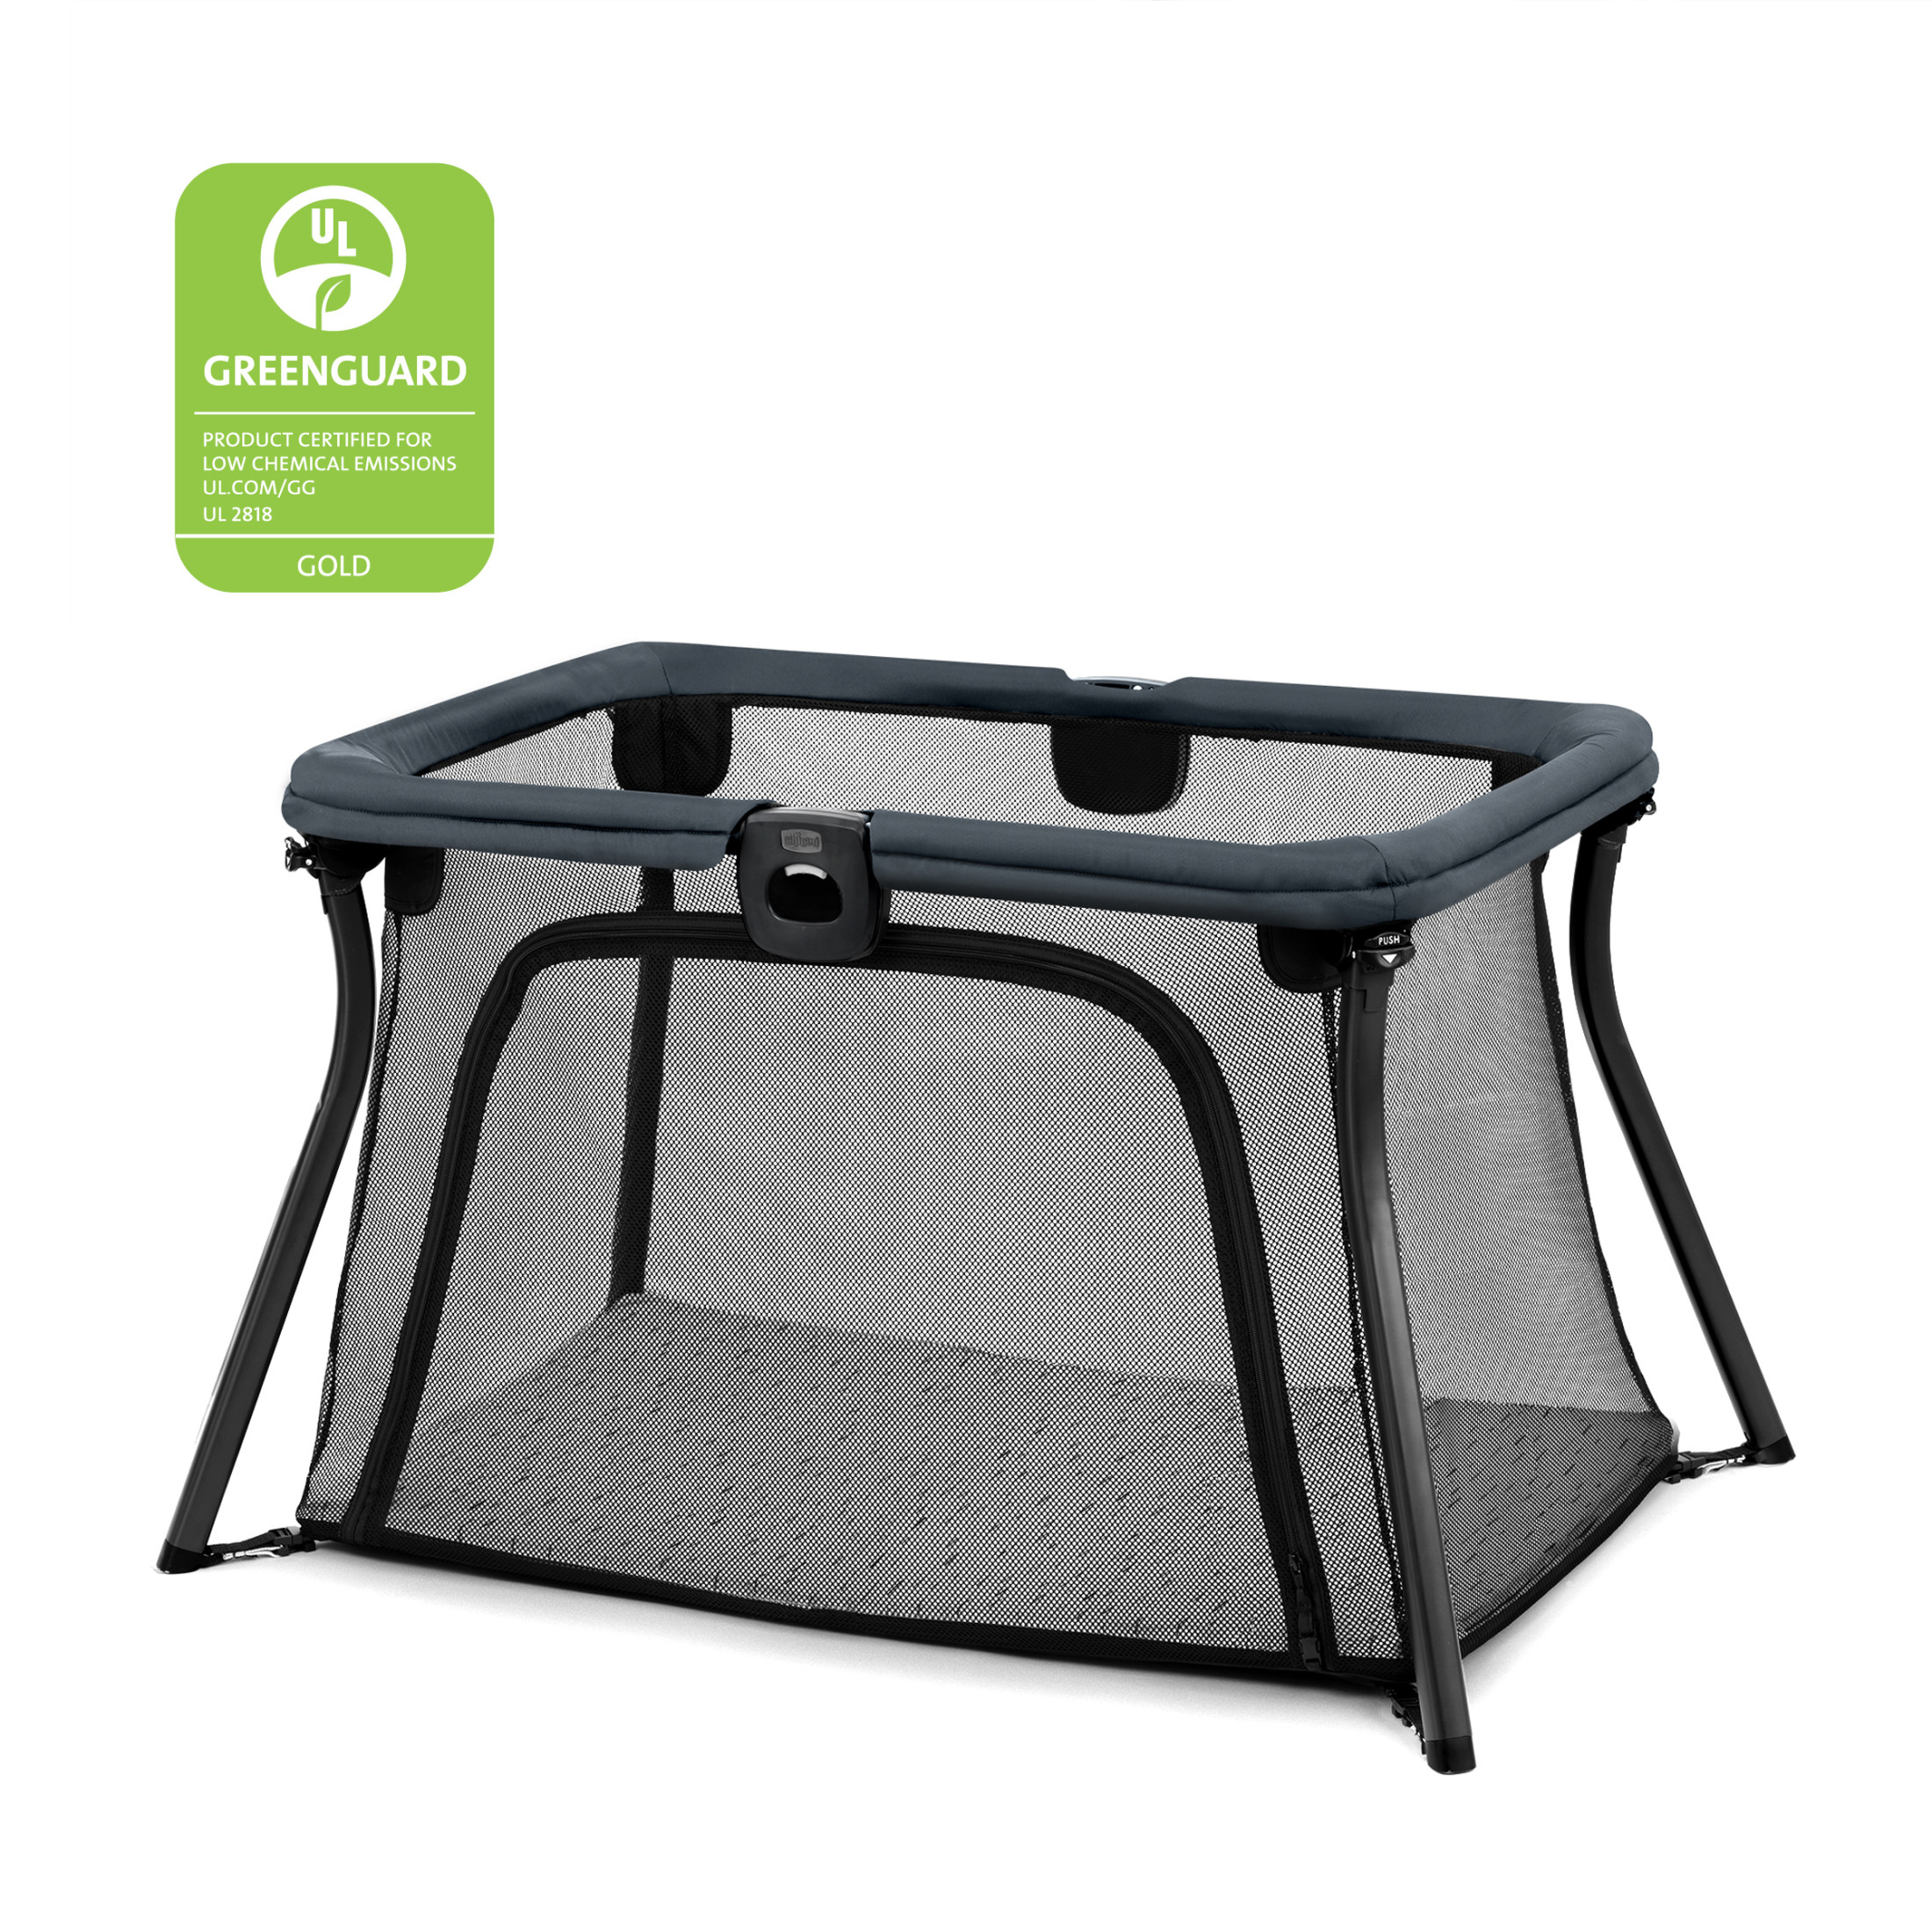 Chicco Alfa Lite Lightweight Travel Playard with Waterproof Mattress, Fitted Sheet Carry Bag - Midnight (Navy) - image 2 of 11